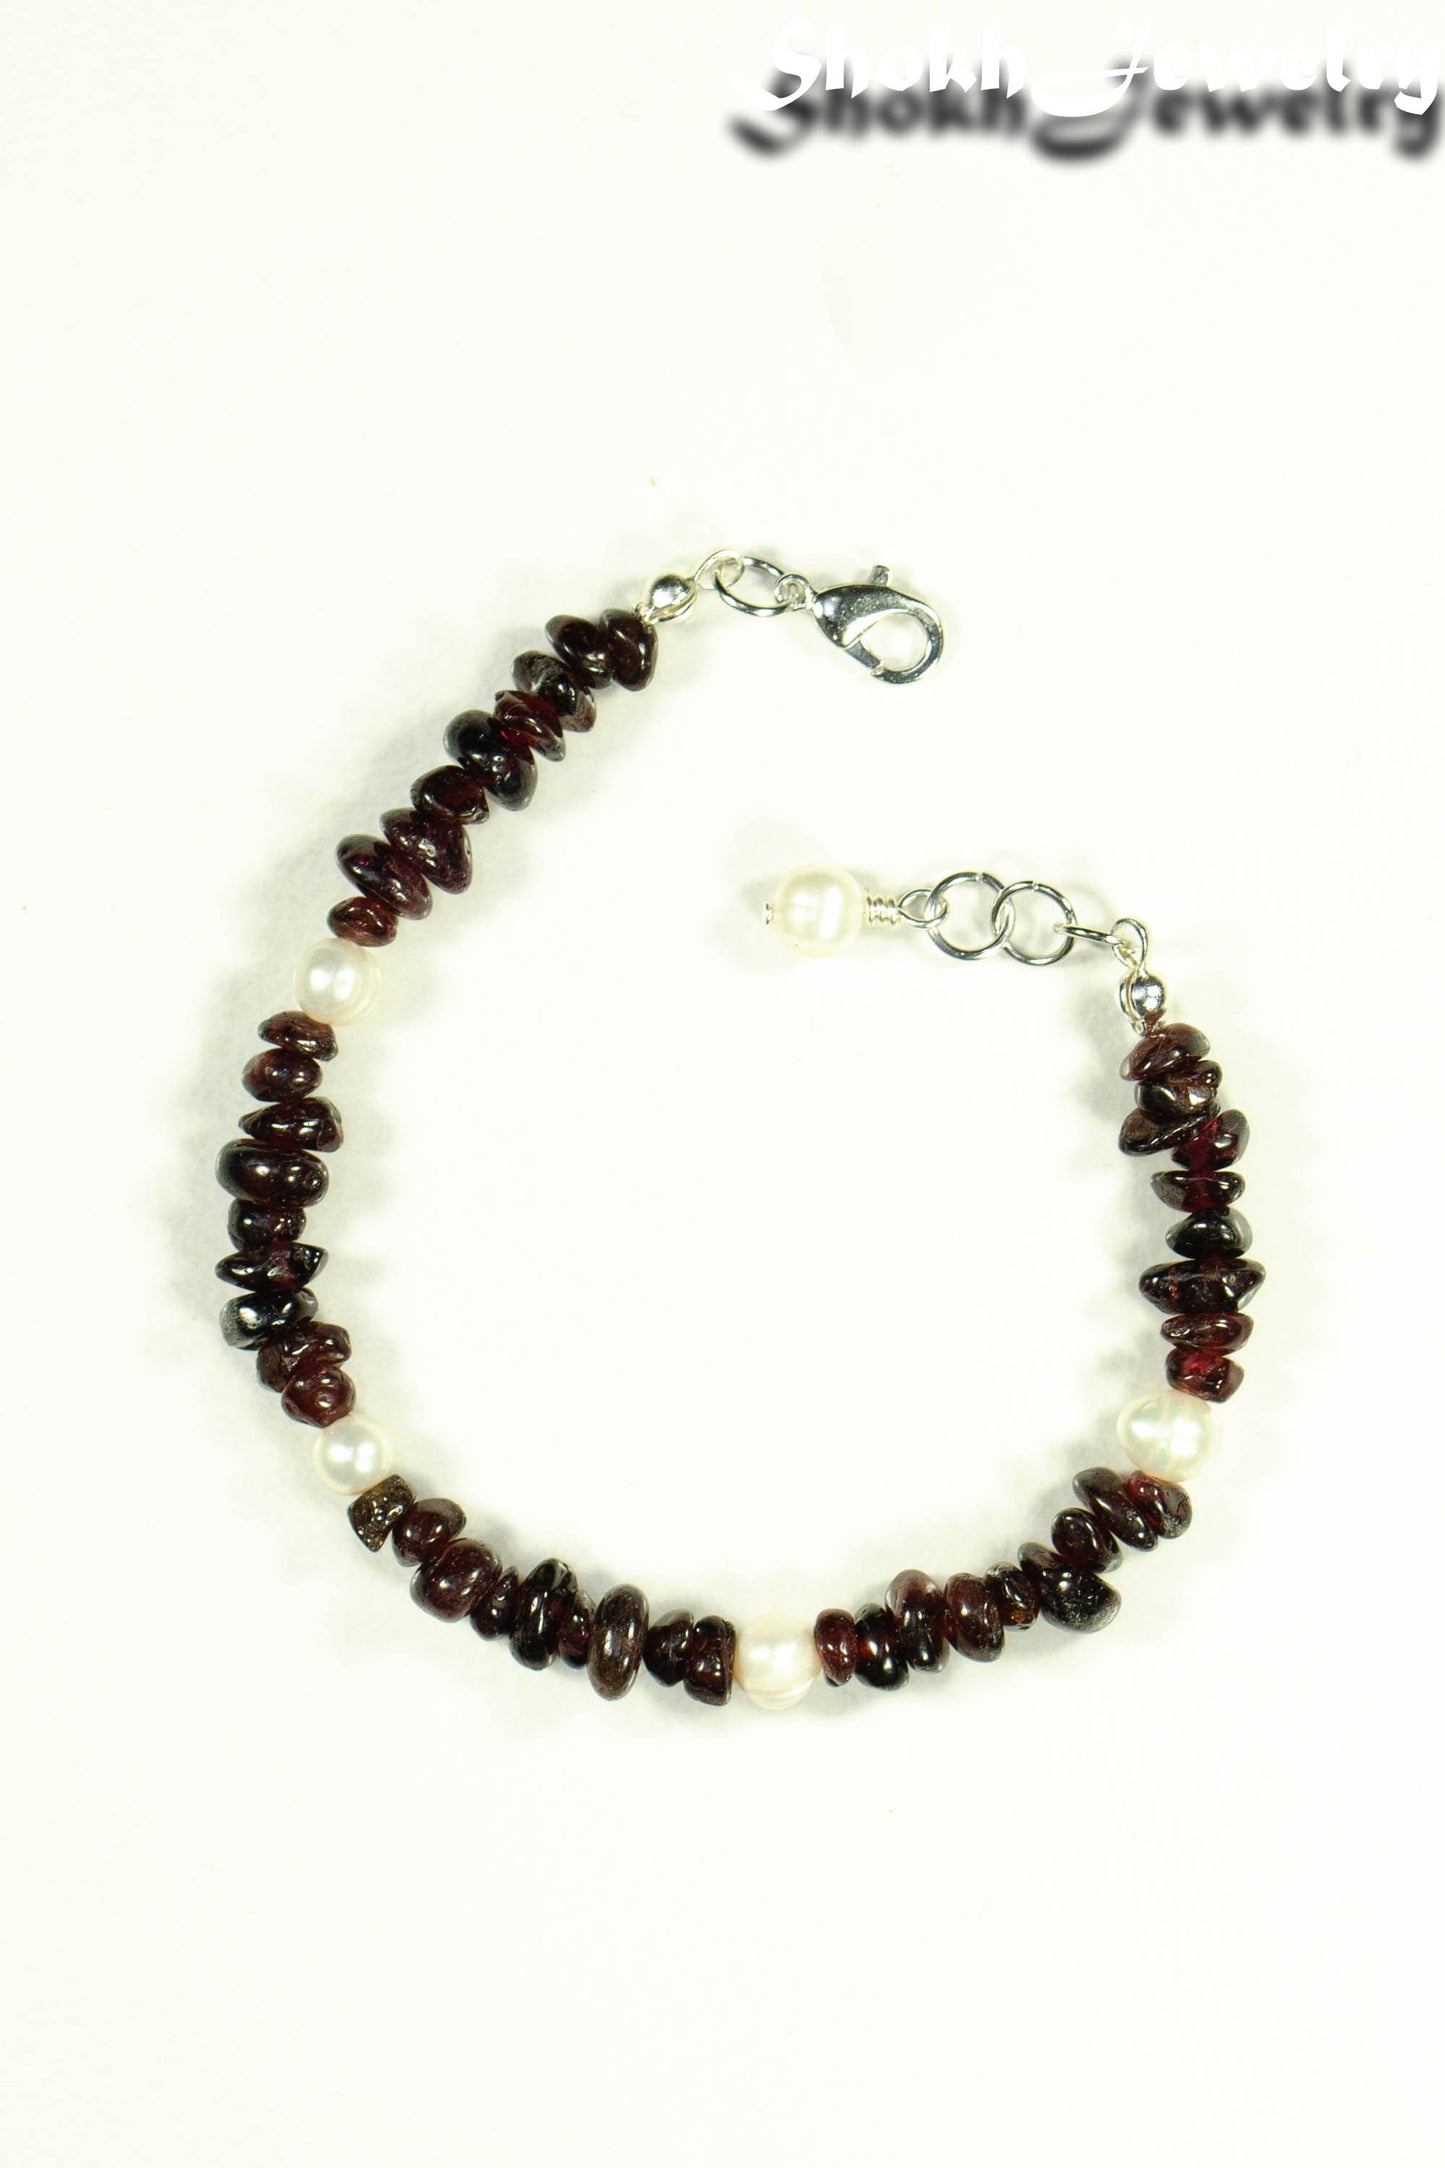 Top view of Natural Garnet Crystal Chip and Pearls Bracelet.